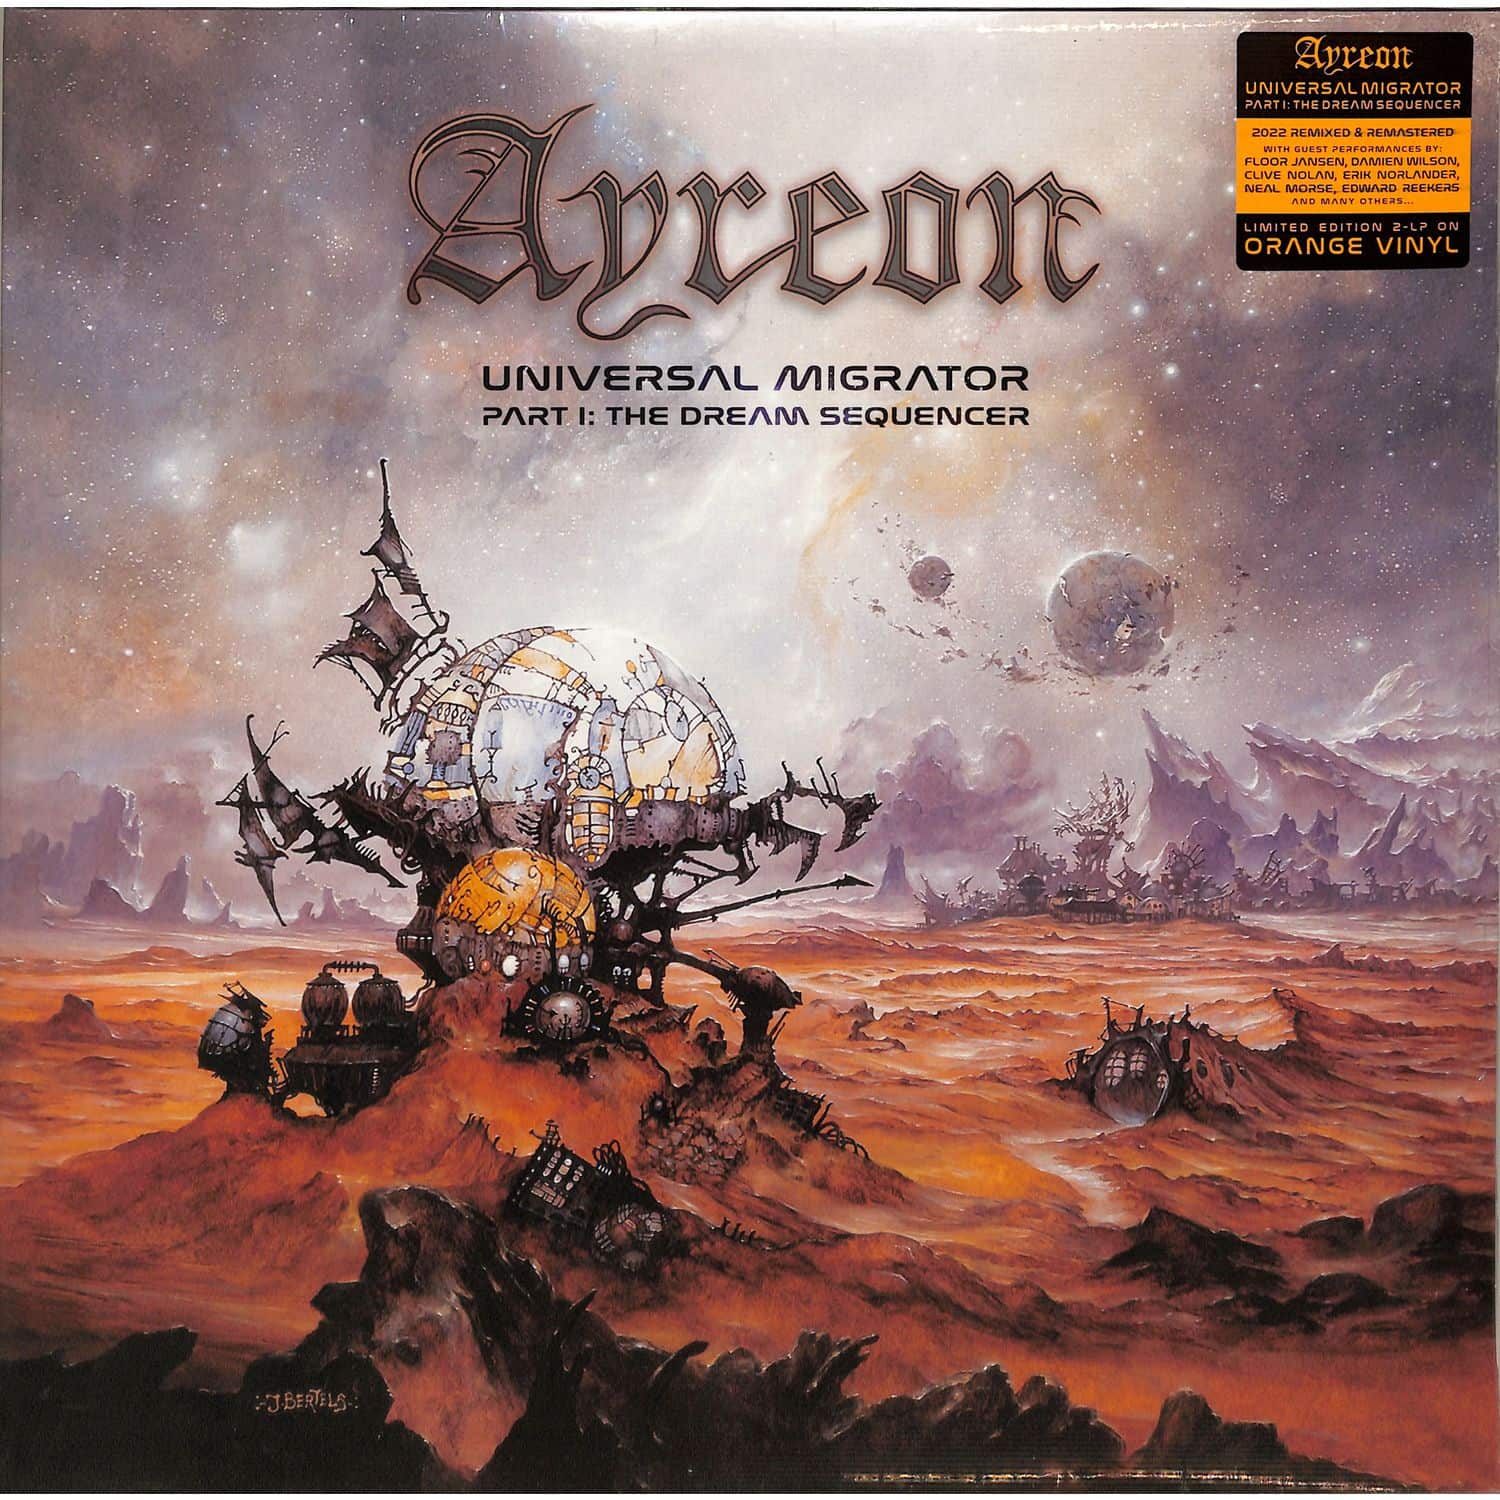 Ayreon - UNIVERSAL MIGRATOR PART I: THE DREAM SEQUENCE 